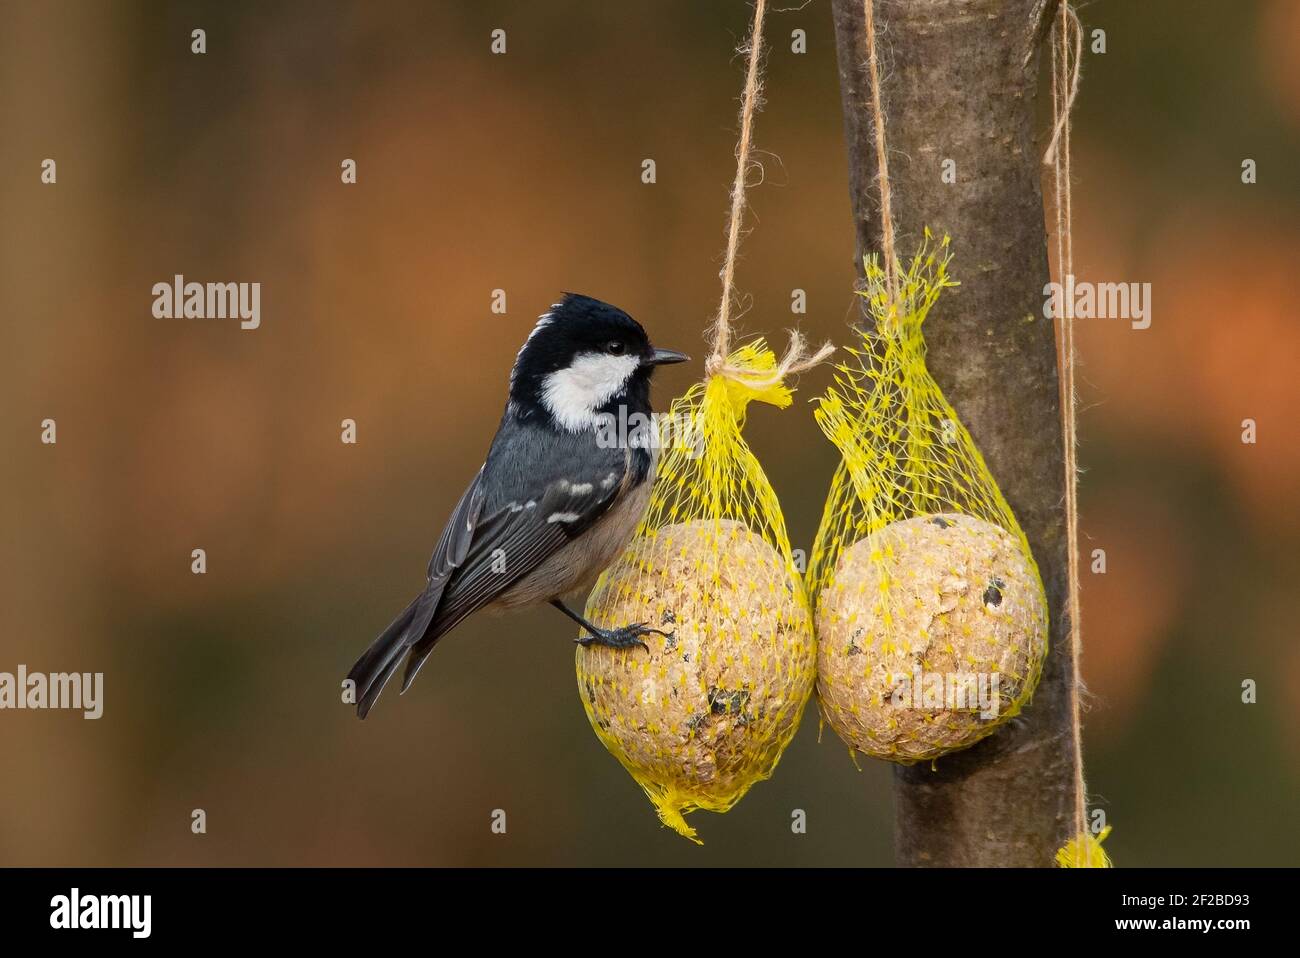 Coal Tit (Periparus ater) Eating from a Tit Dumpling Stock Photo